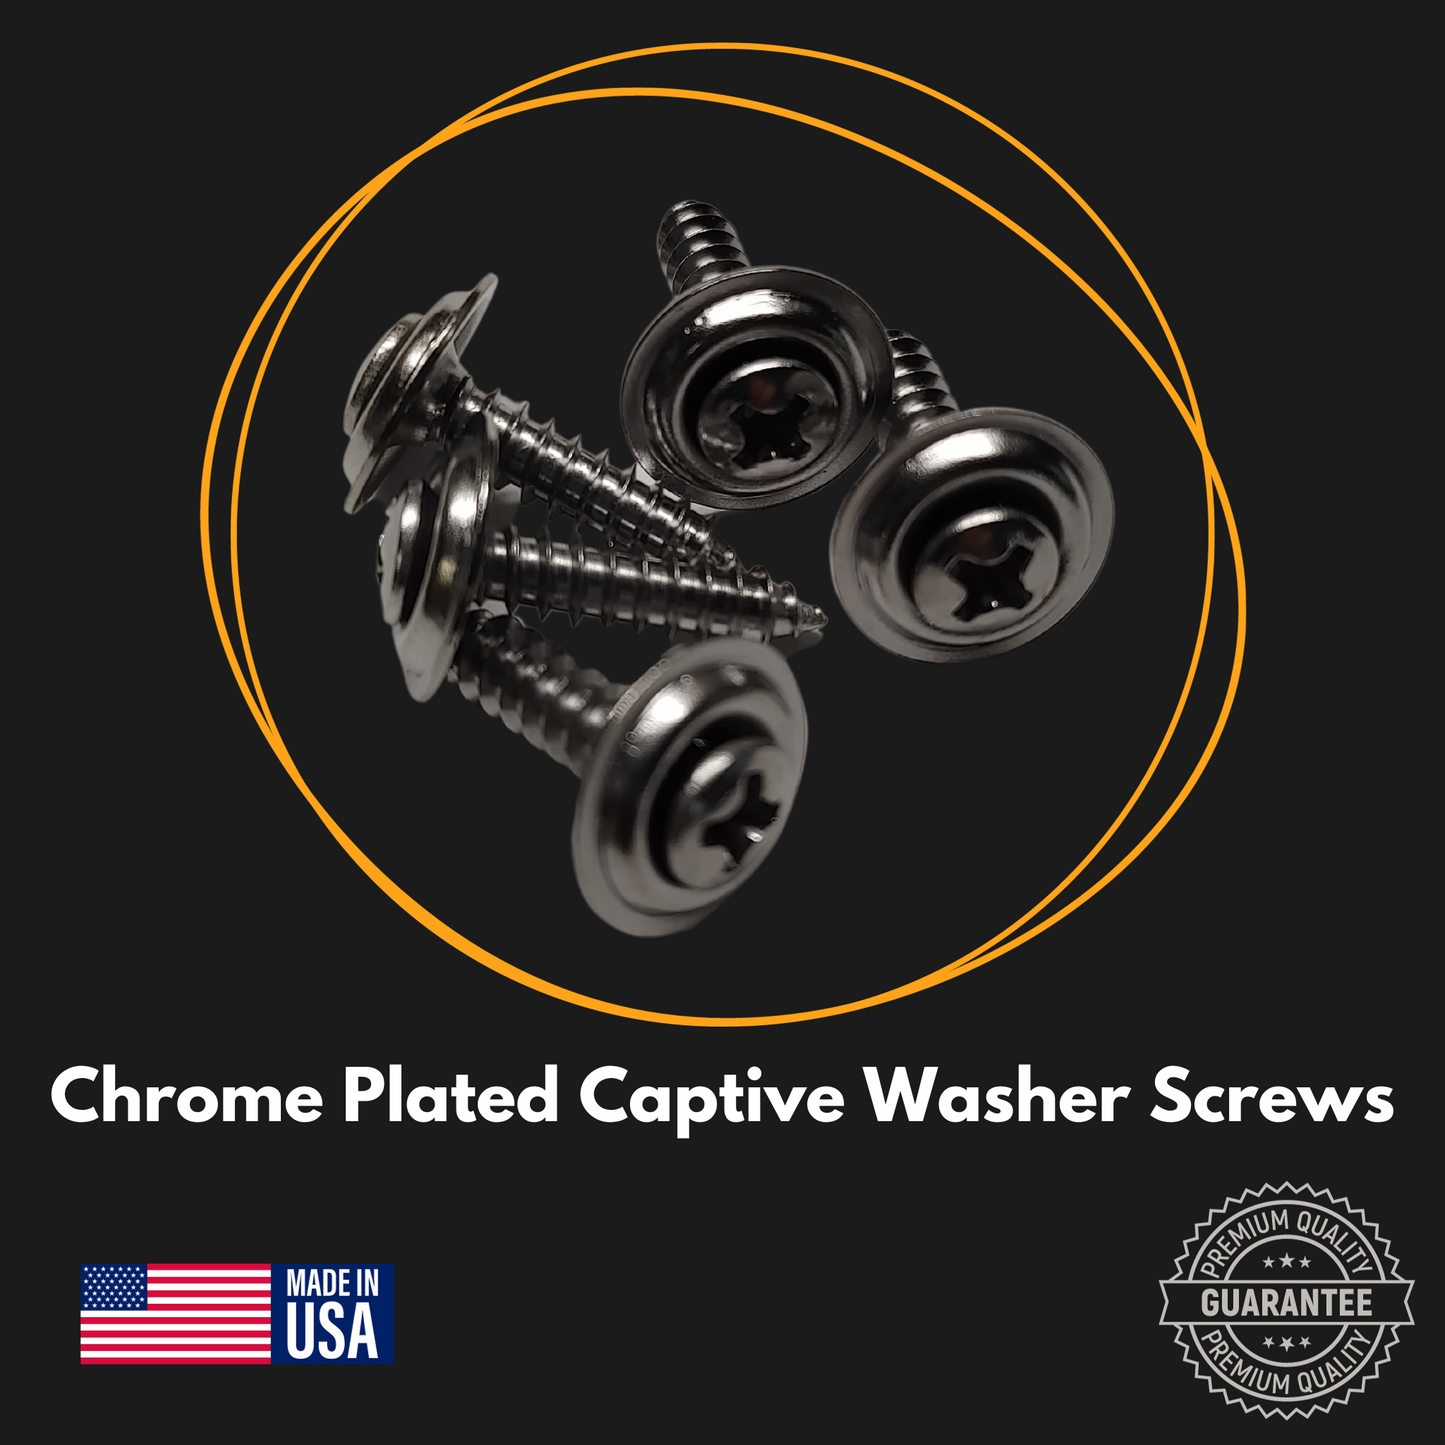 Chrome plated captive washer screws made in the USA as part of the OnlyGenerals roof filler panel kit